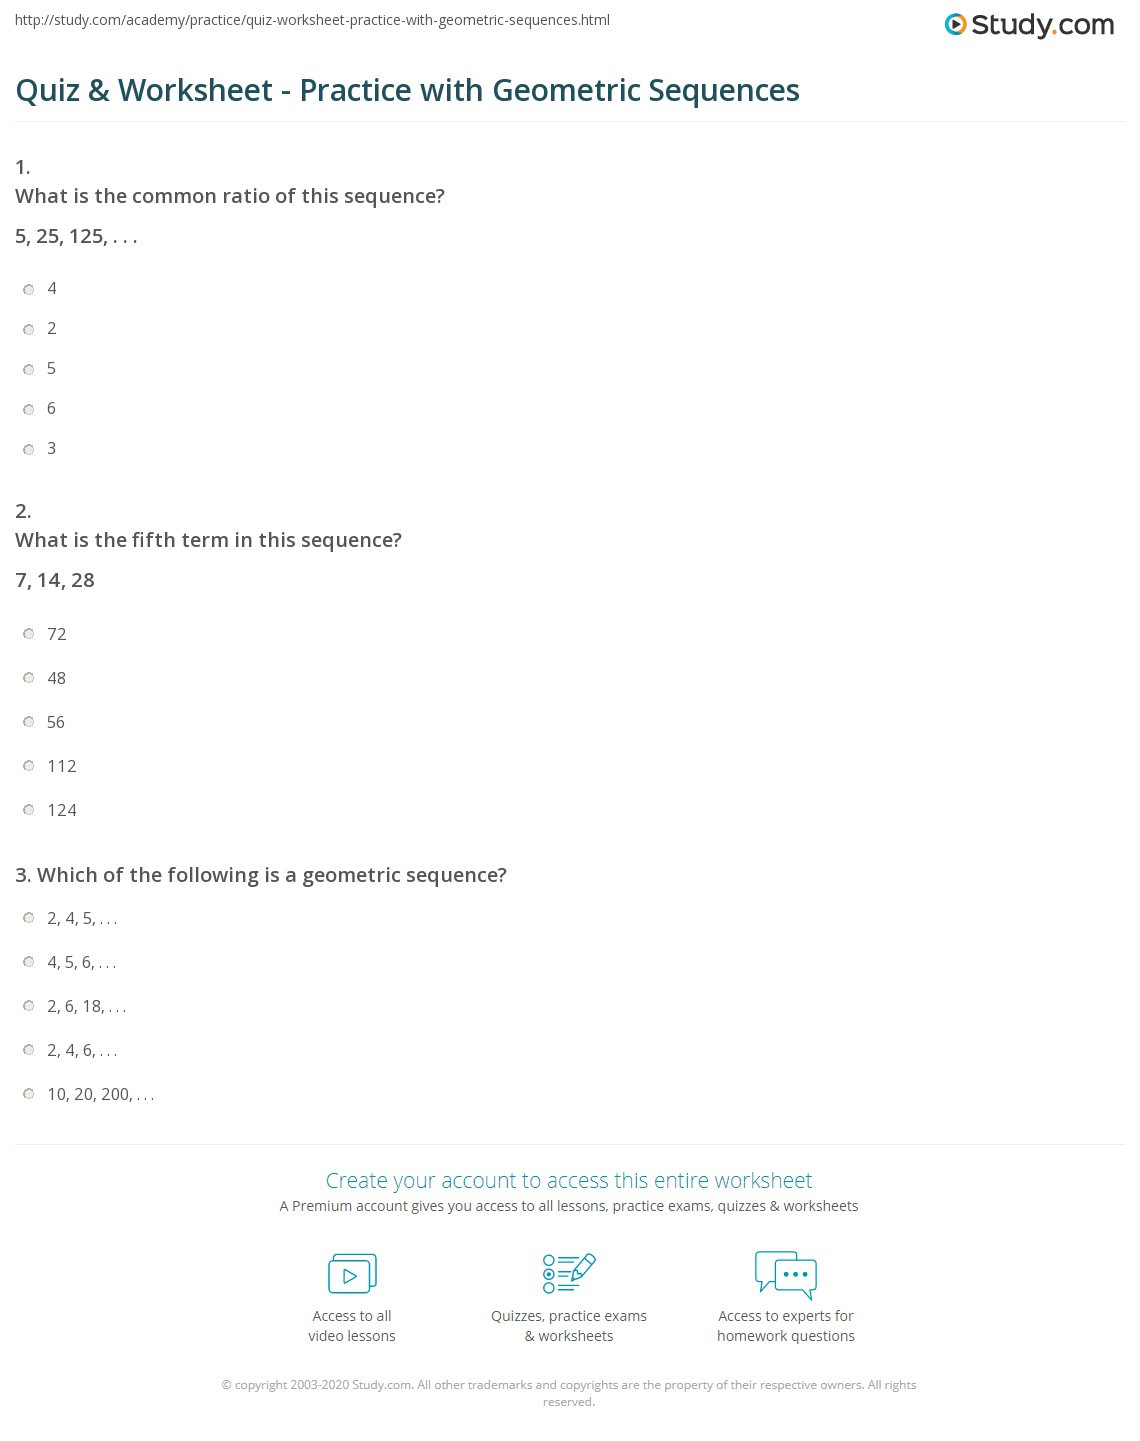 Geometric Sequence and Series Worksheet Quiz &amp; Worksheet Practice with Geometric Sequences